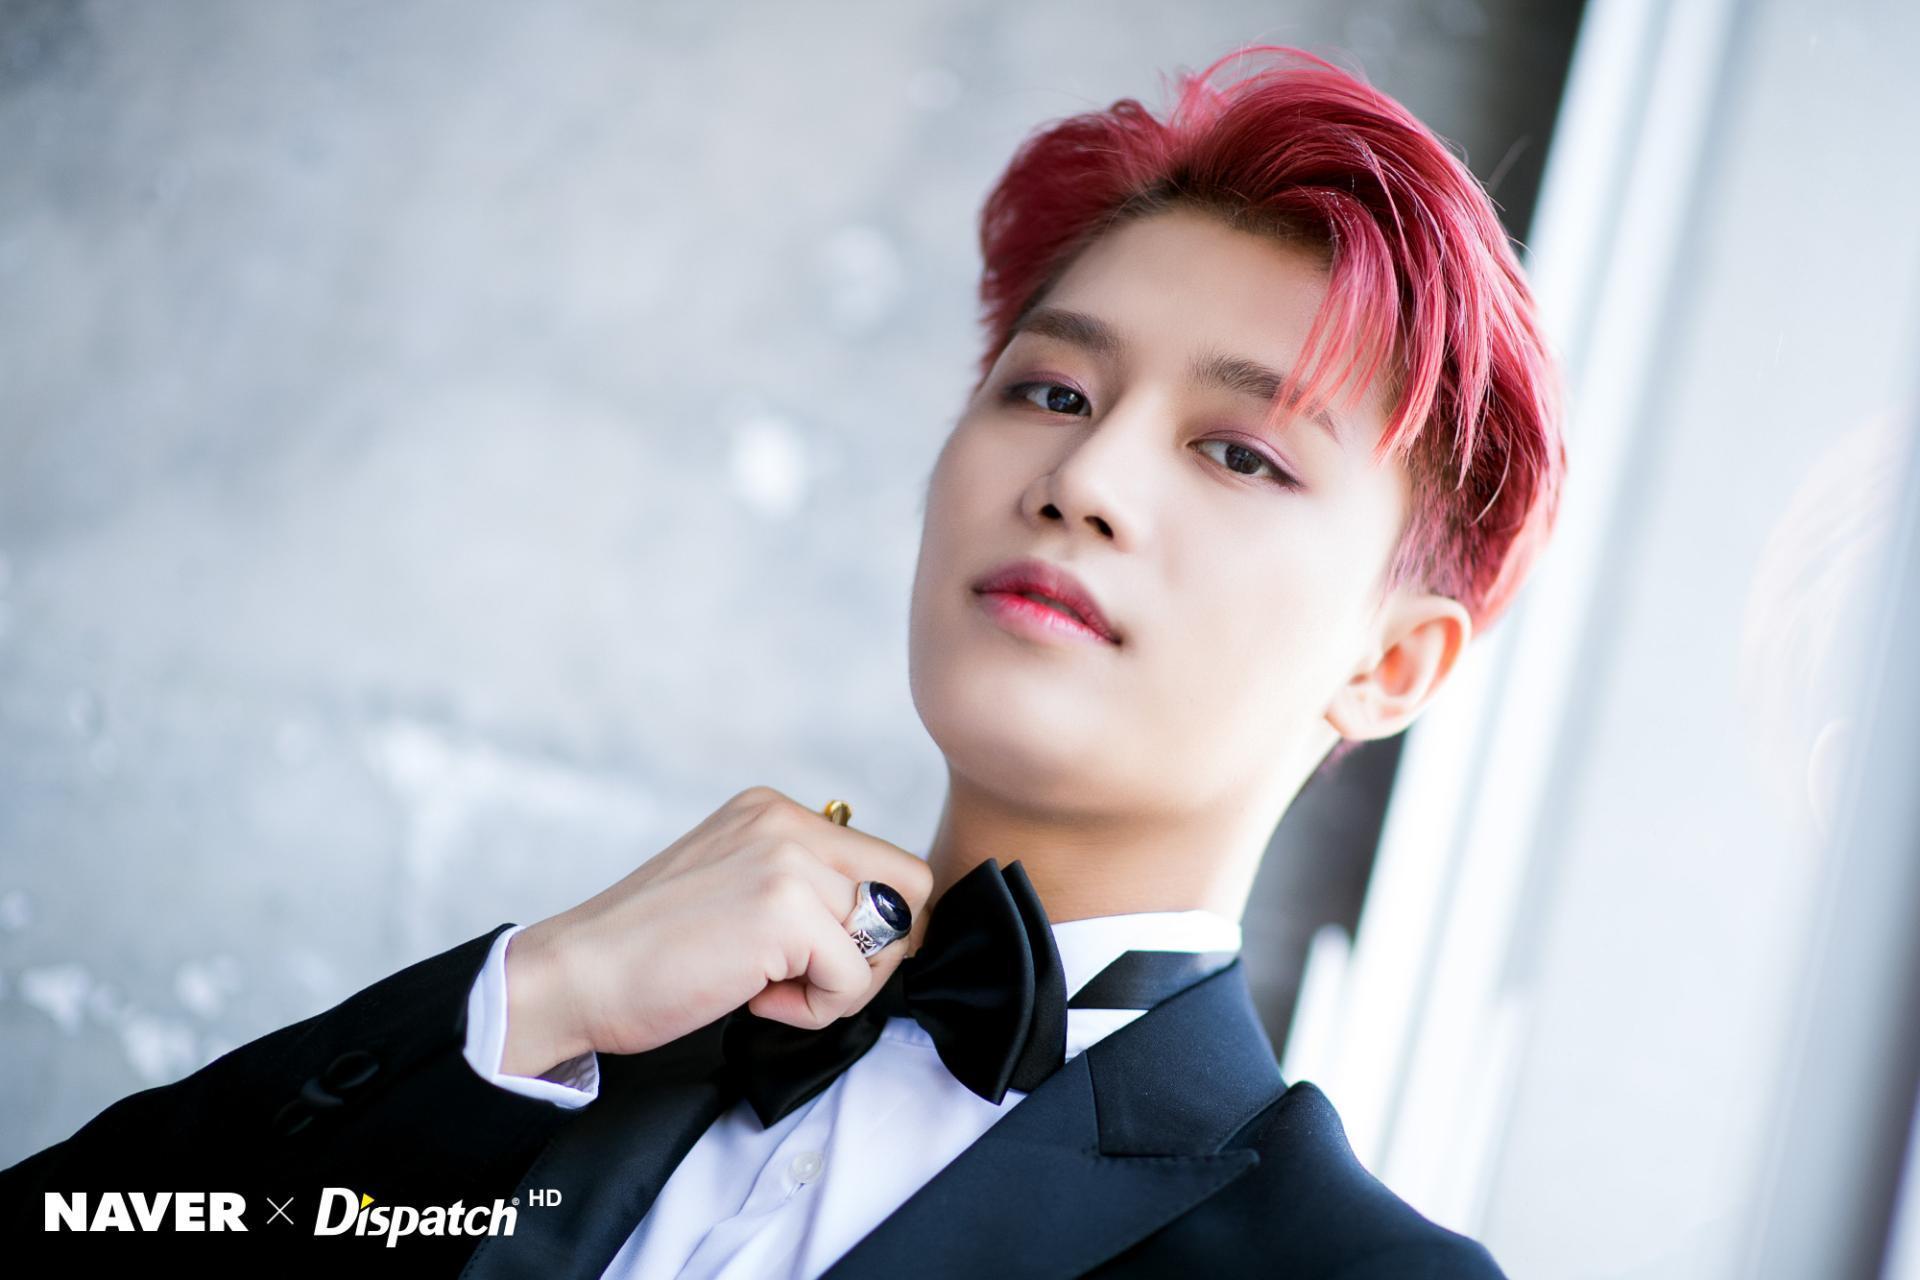 NCT U image Taeil HD wallpaper and background photo